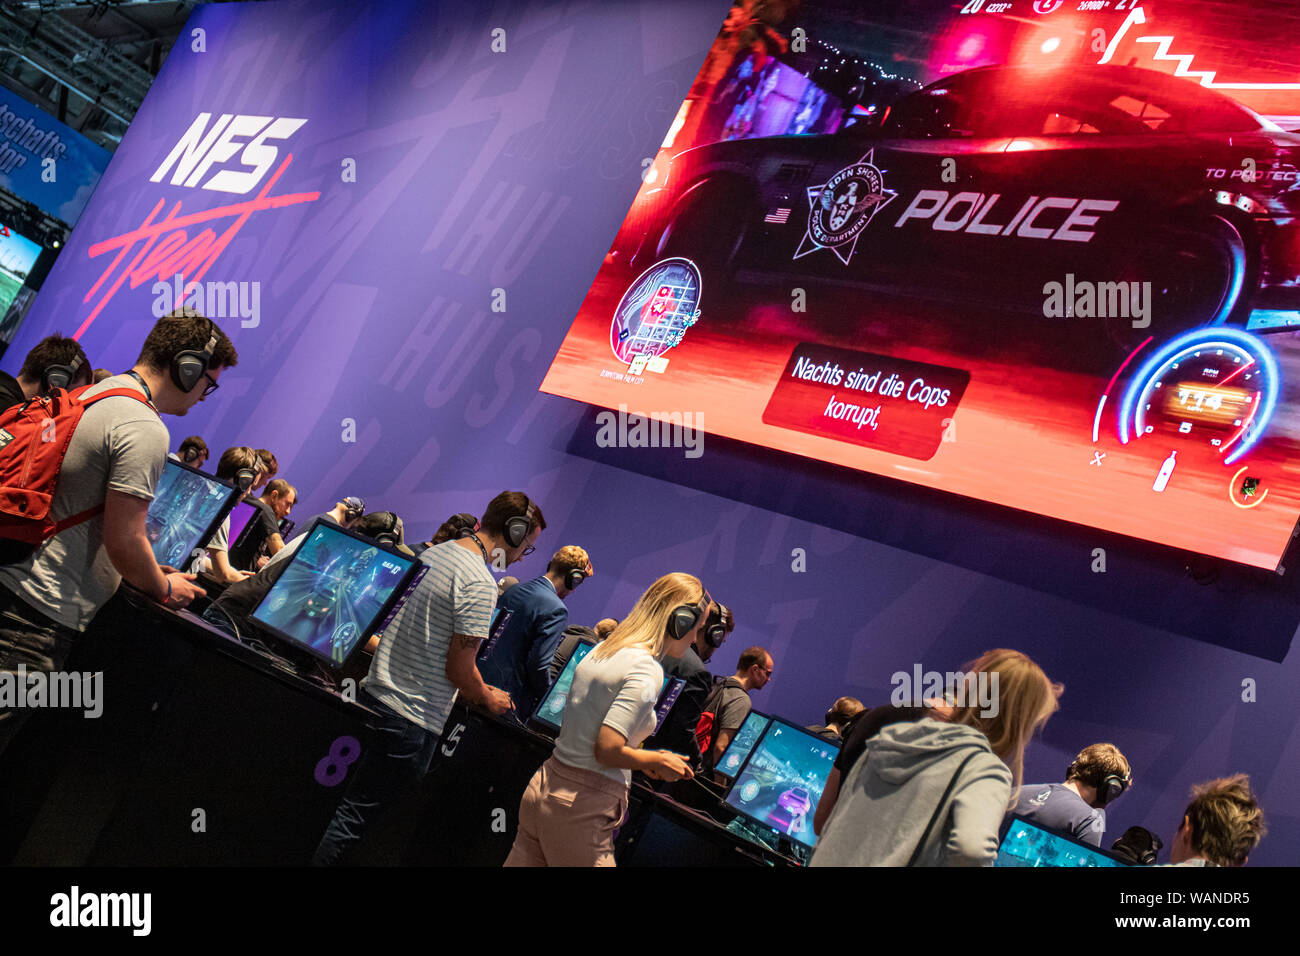 Cologne, Germany. 20th Aug, 2019. Gamescom 2019: Visitors are playing racing game Need for Speed Heat by publisher Electronic Arts. Gamescom is the world's largest trade fair for computer and video games, at Koelnmesse in Cologne, Germany, from 20th to 24th August 2019. Photocredit: Christian Lademann Stock Photo